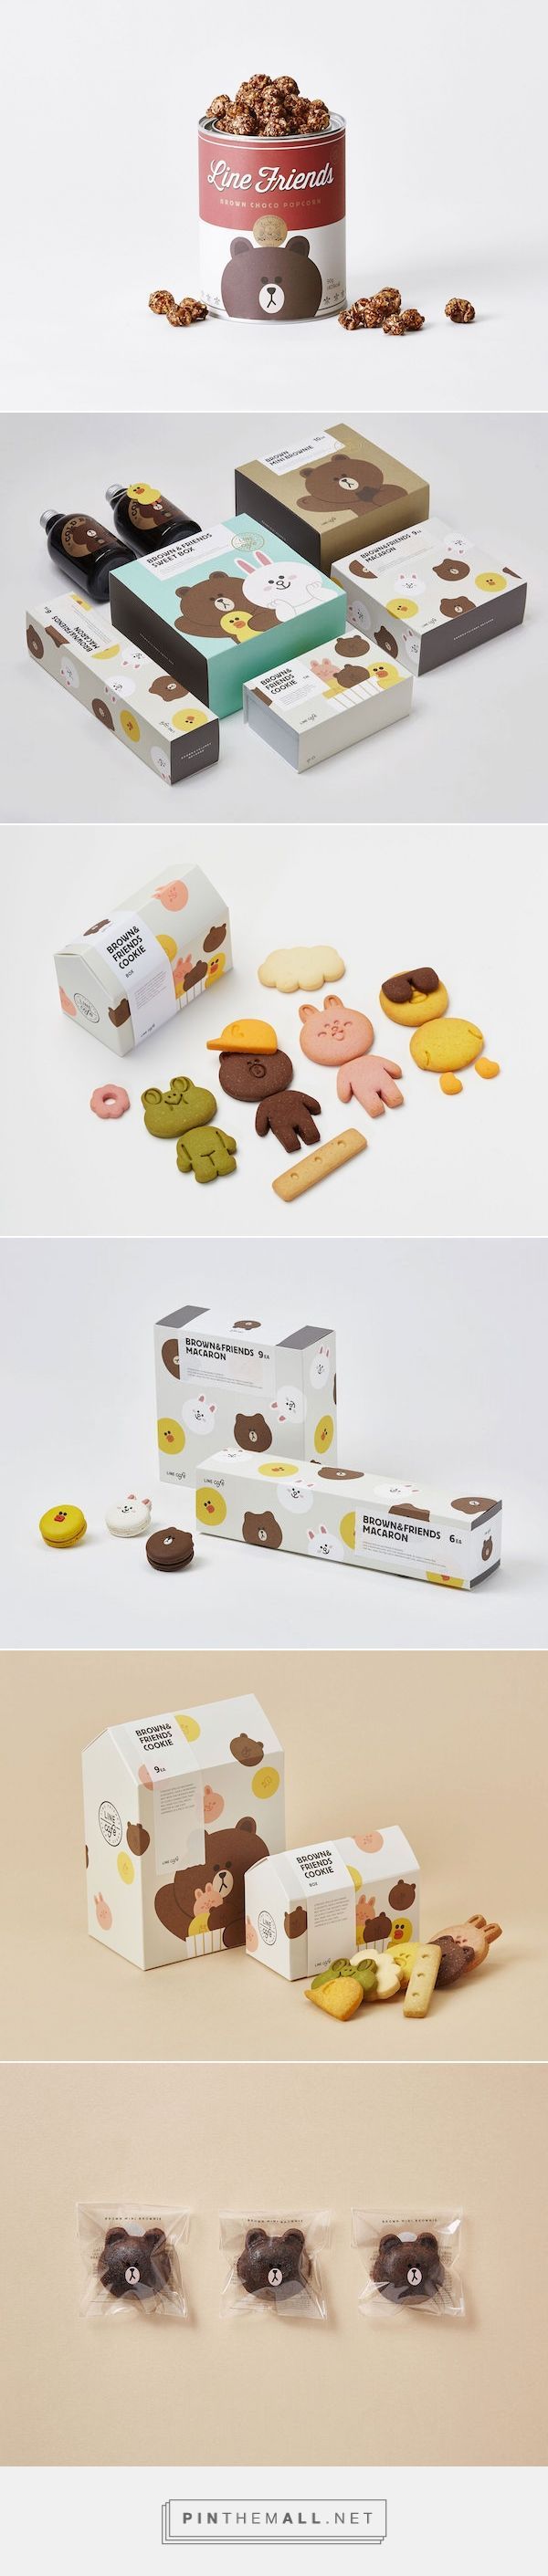 The Award-Winning Packaging Of LINE Café’s Snacks via DesignTAXI.com curated by Packaging Diva PD.